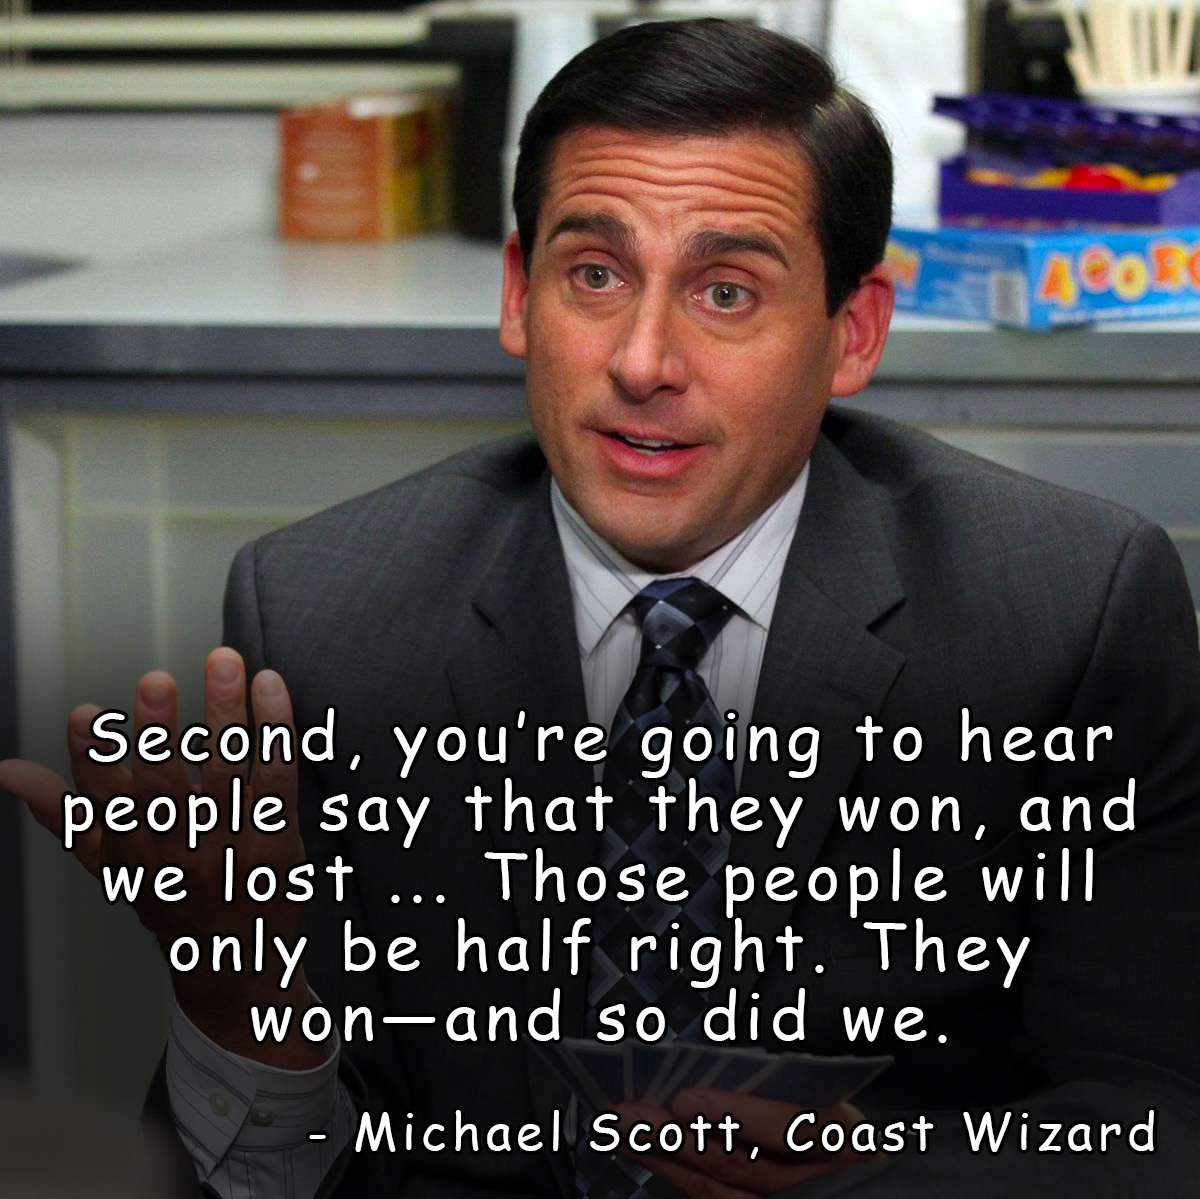 I think I know who @Wizards_DnD's new PR guy is...

#OpenDnD #MichaelScott #DnDBegond #StopTheSub